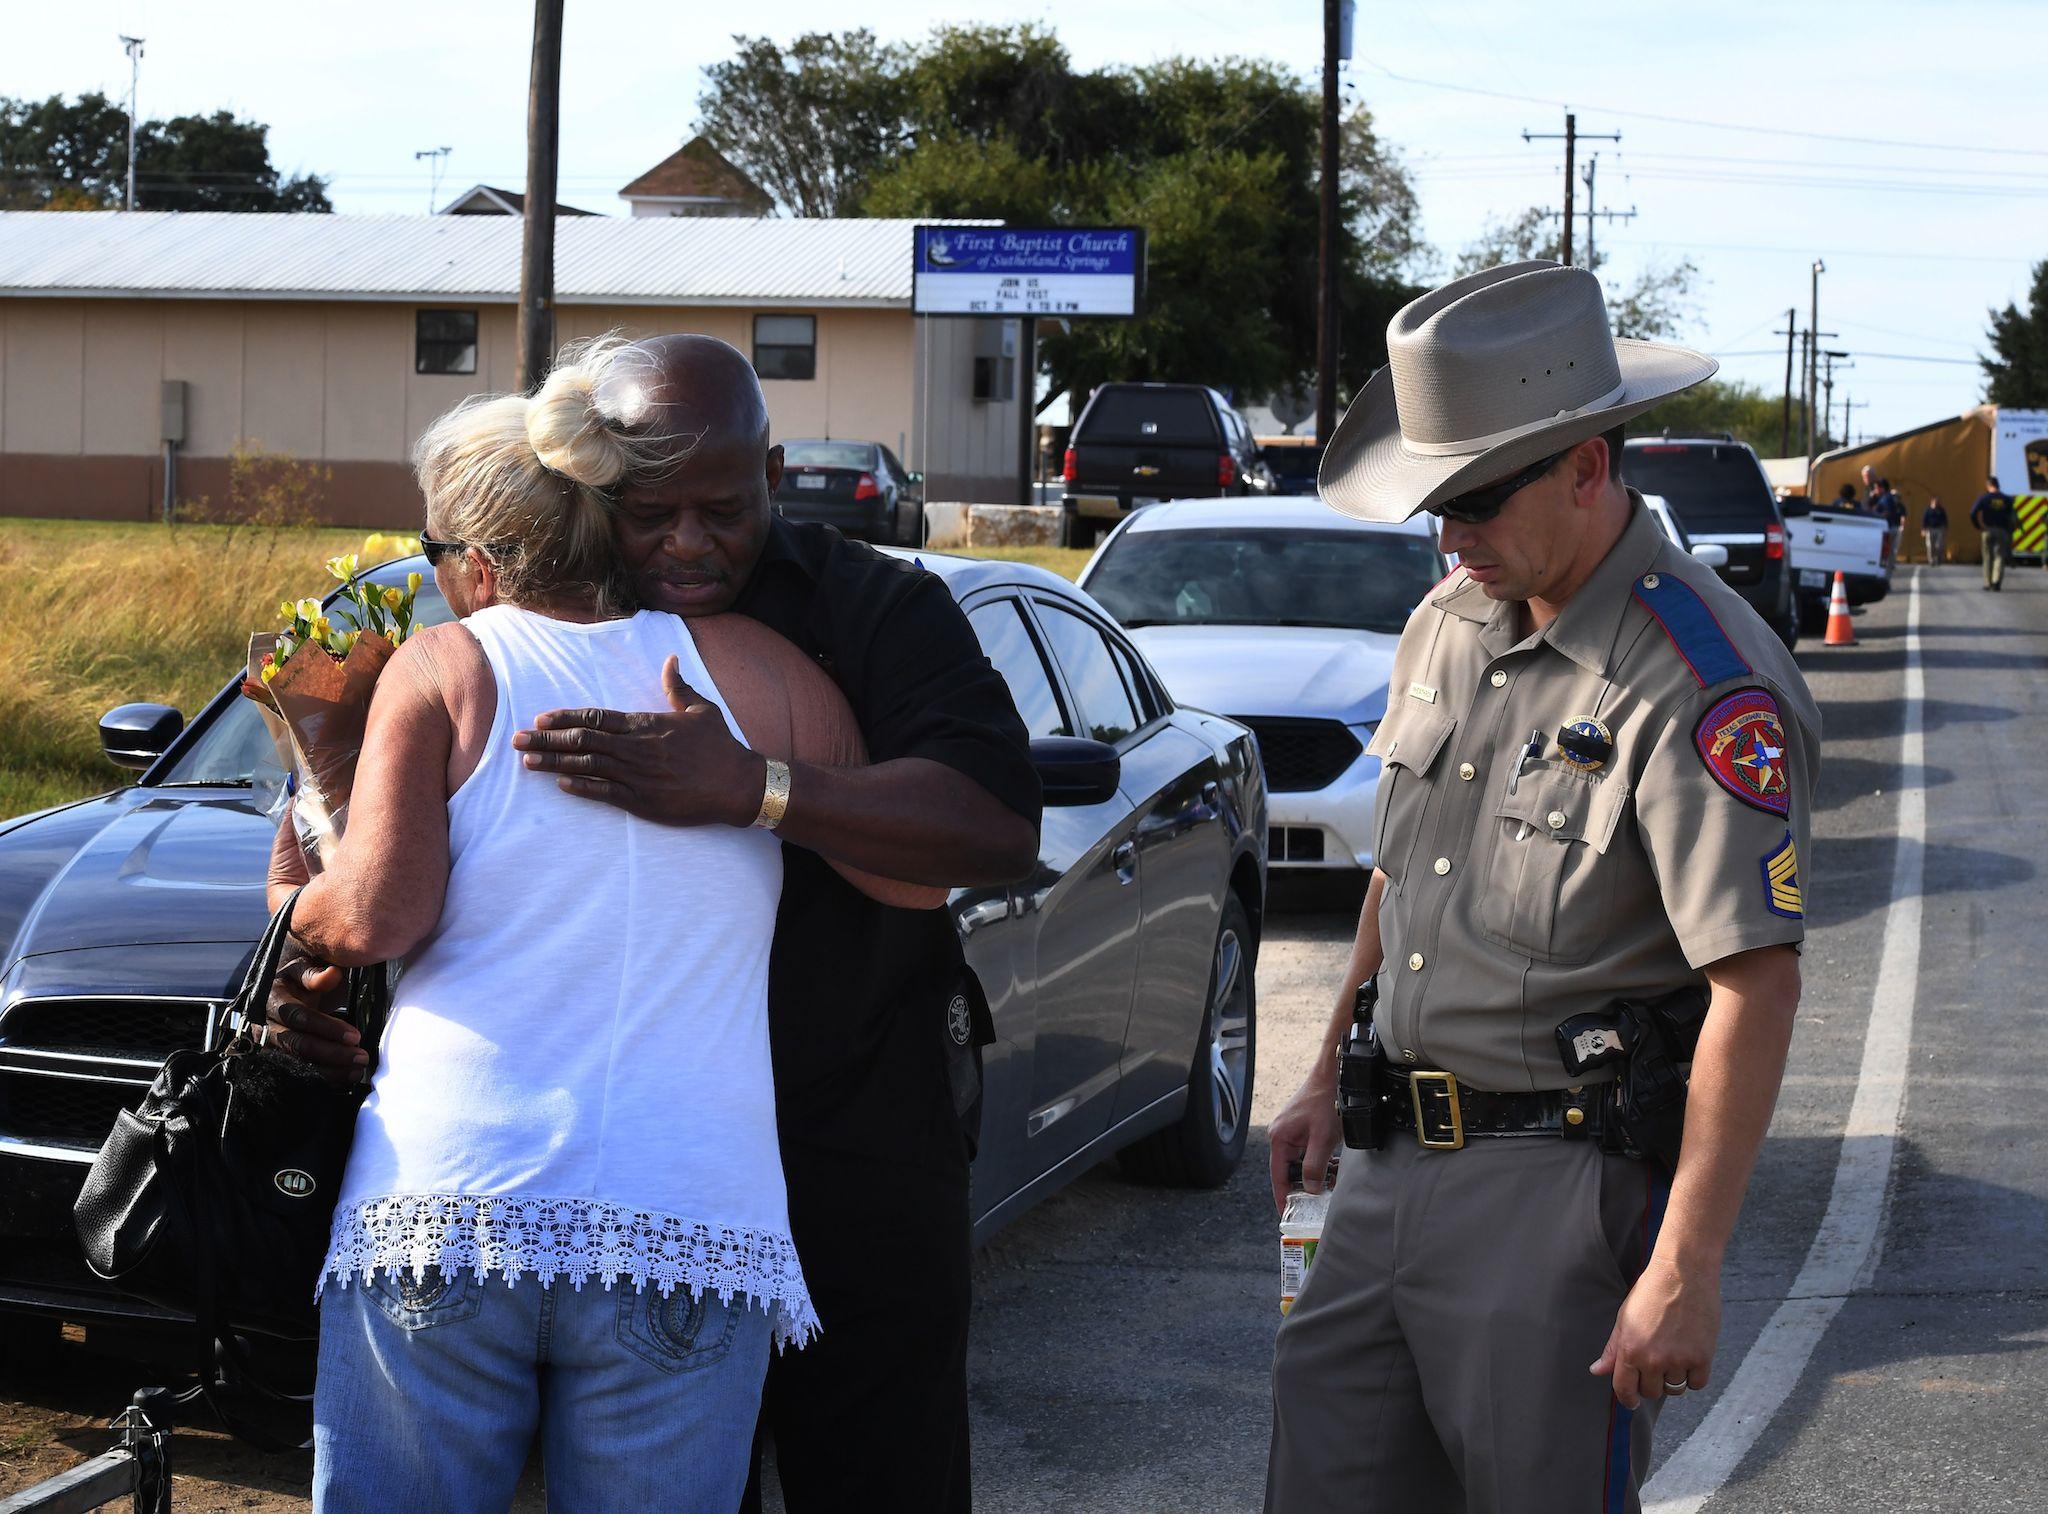 Local resident Jamie Rose is hugged by church member Raymond Antonio as she delivers flowers, at the entrance to the First Baptist Church after a mass shooting that killed 26 people in Sutherland Springs, Texas (MARK RALSTON/AFP/Getty Images)